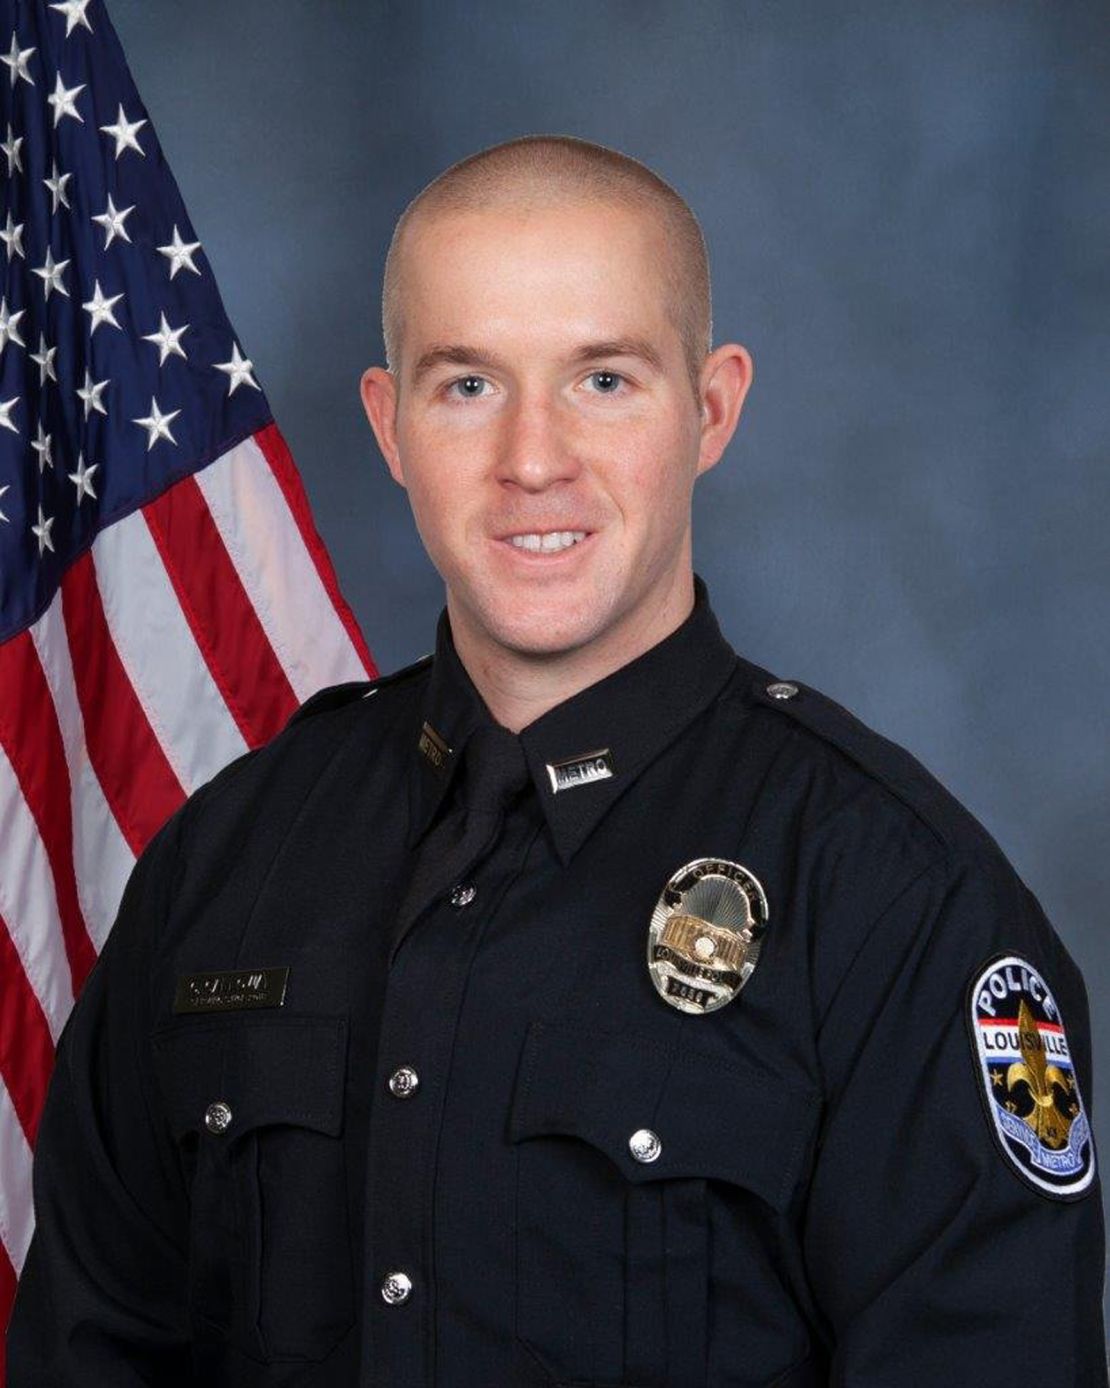 Officer Cory "CJ" Galloway, shown in a photo provided by the Louisville Metro Police, has been with the department since 2018. 